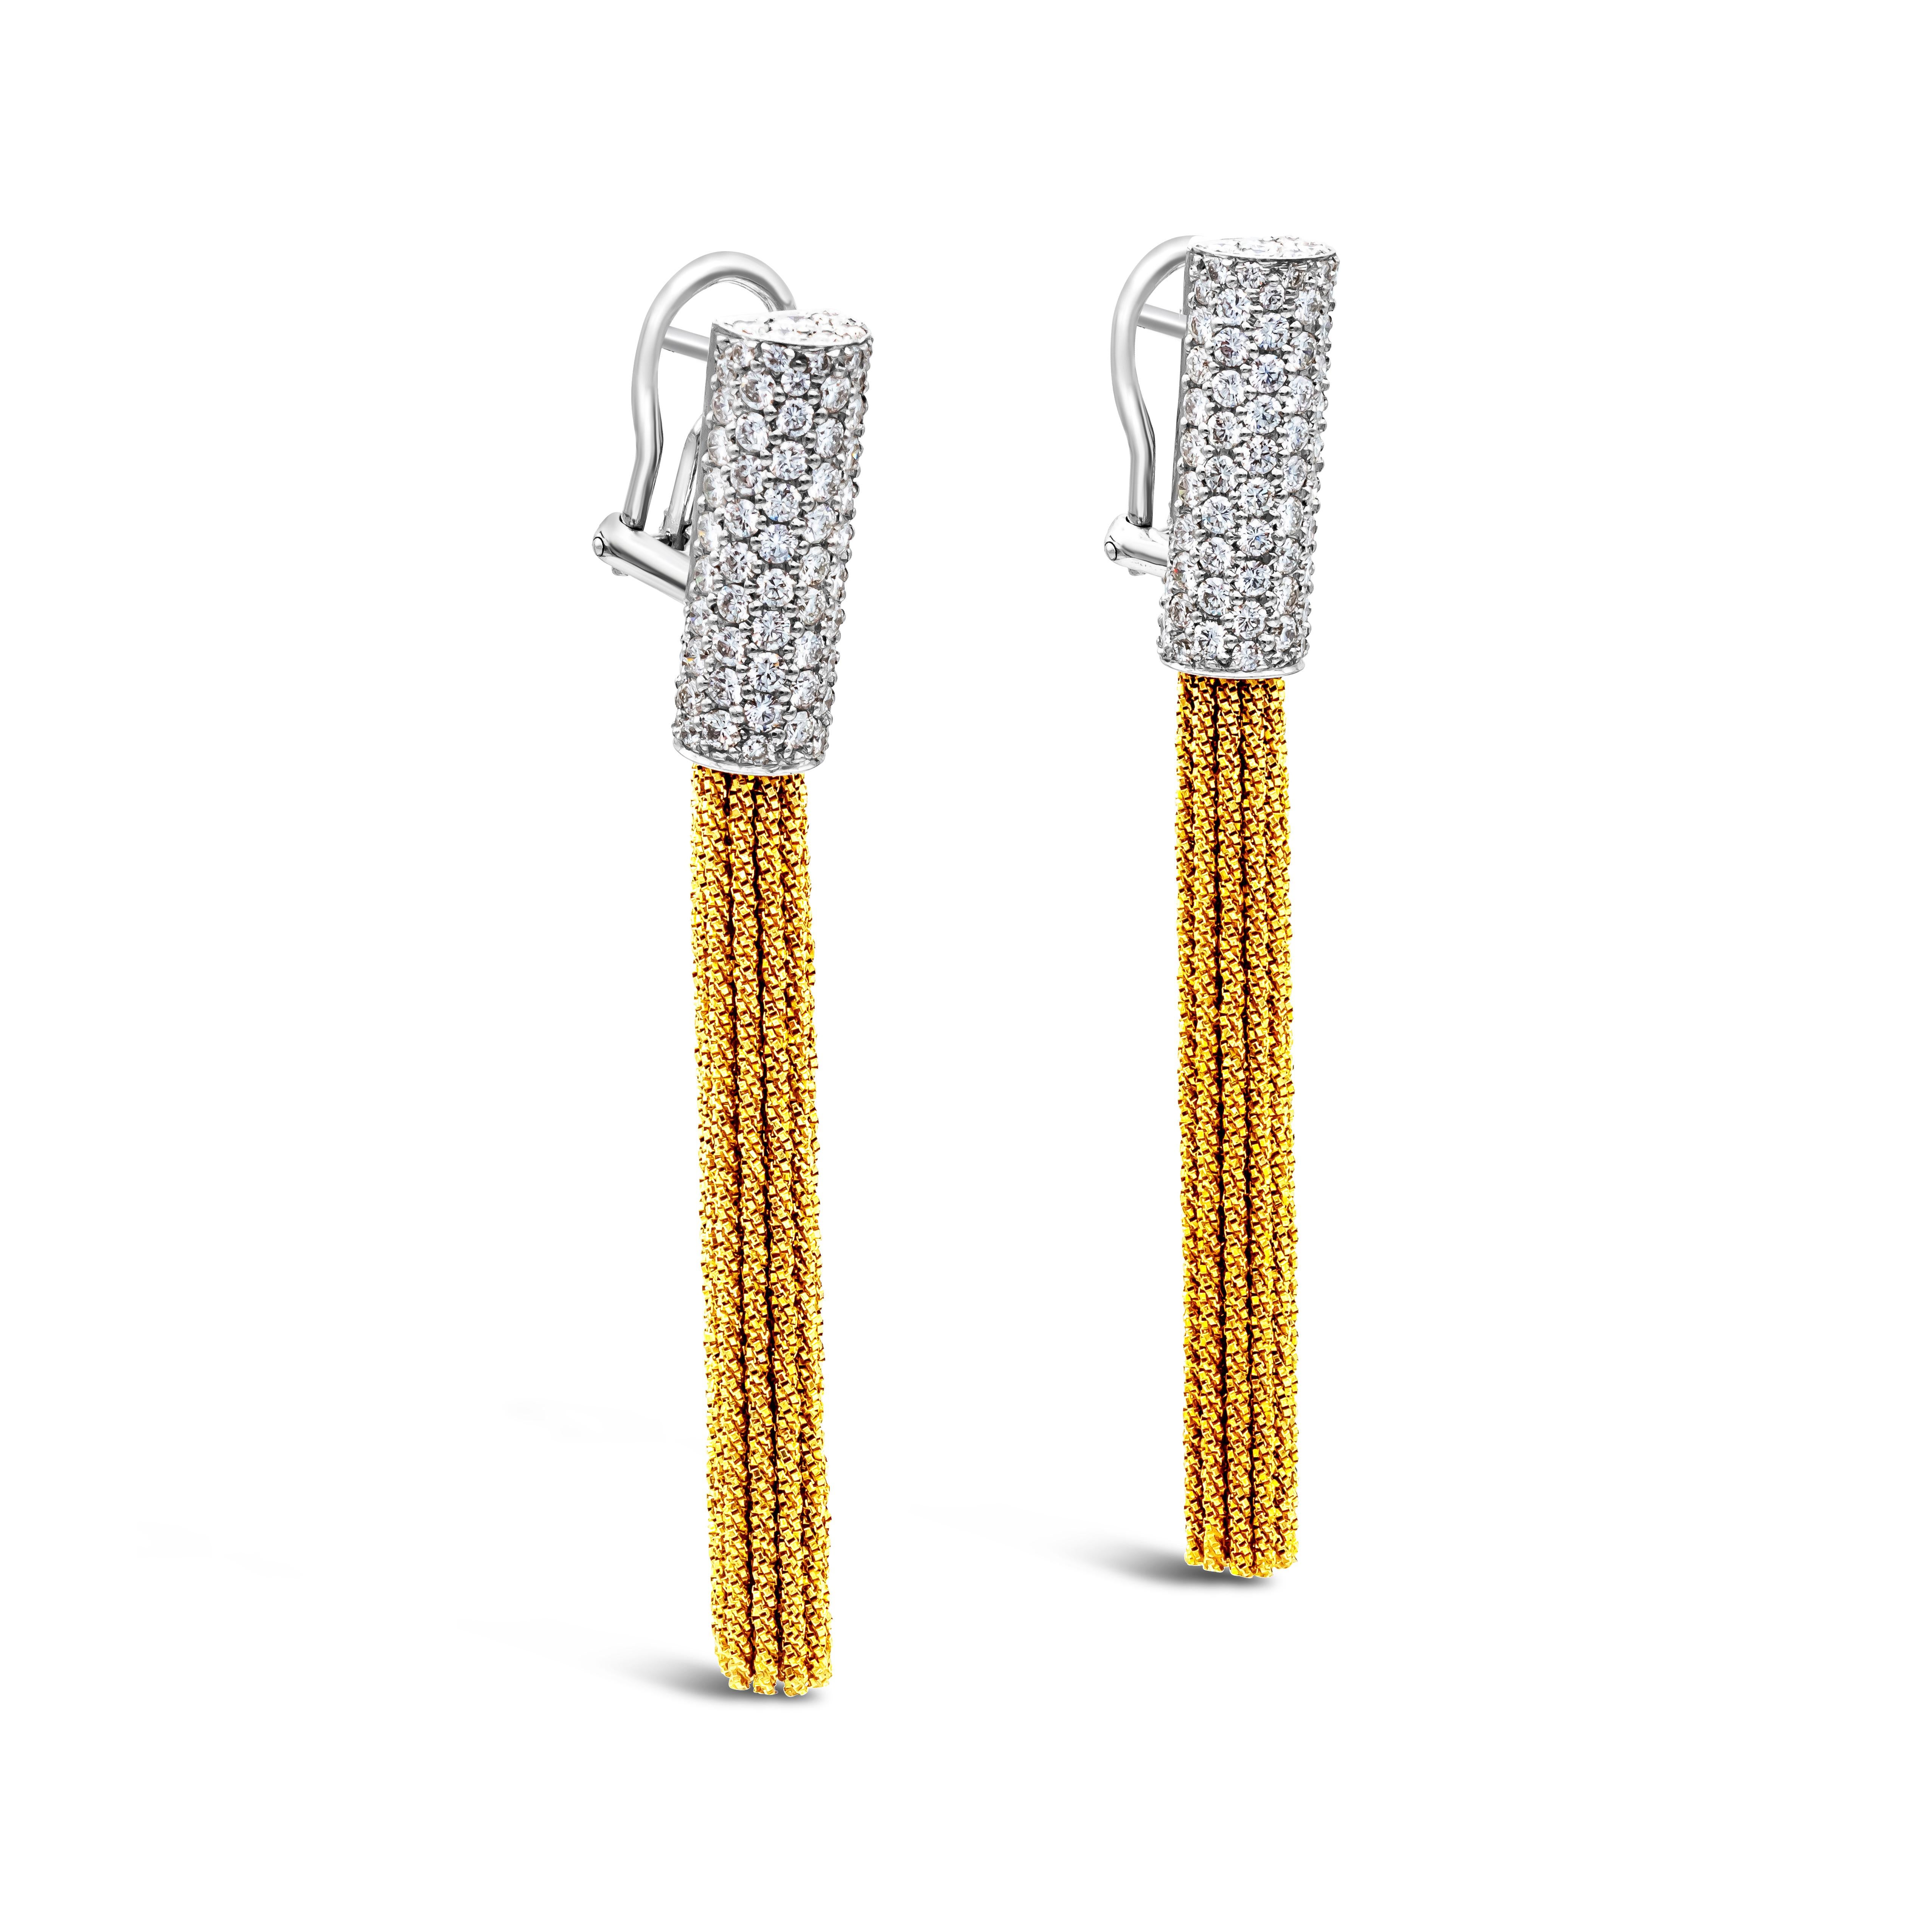 Yuri Ichihashi woven 18kt yellow gold tassel earrings set with 3.25 carats total in diamonds, F Color and VS in Clarity.  